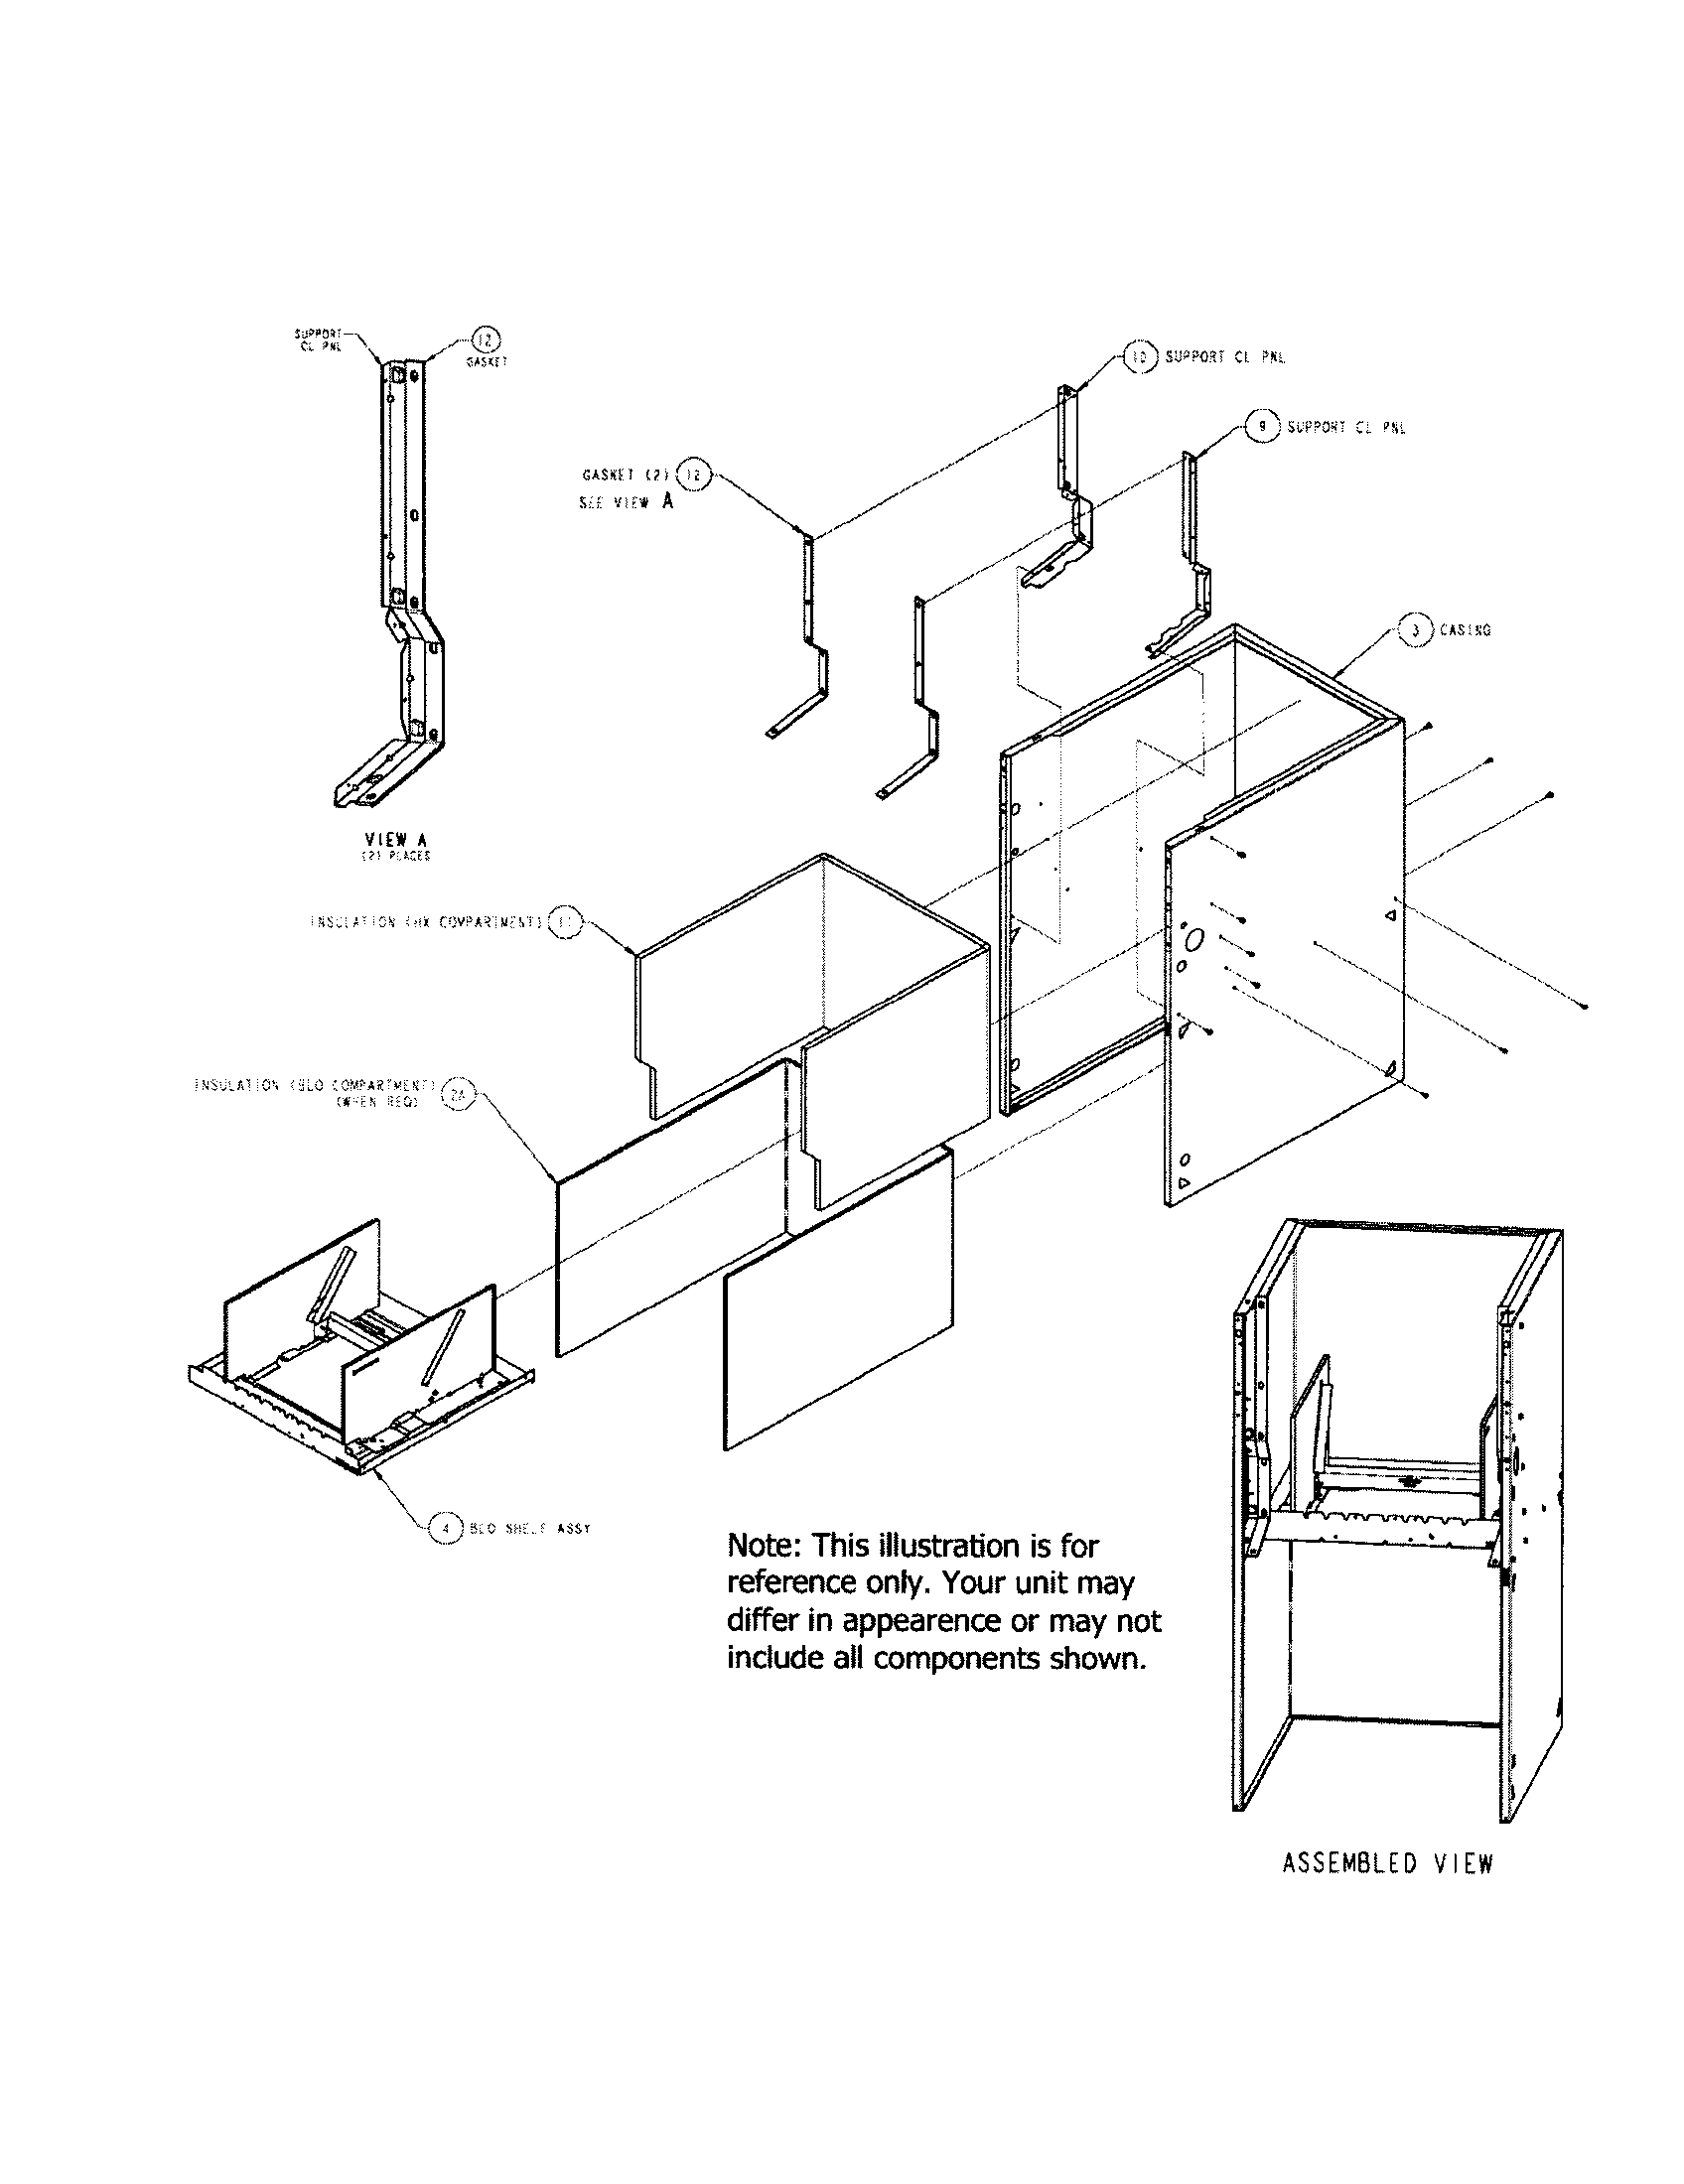 Carrier  Furnace  Casing assembly